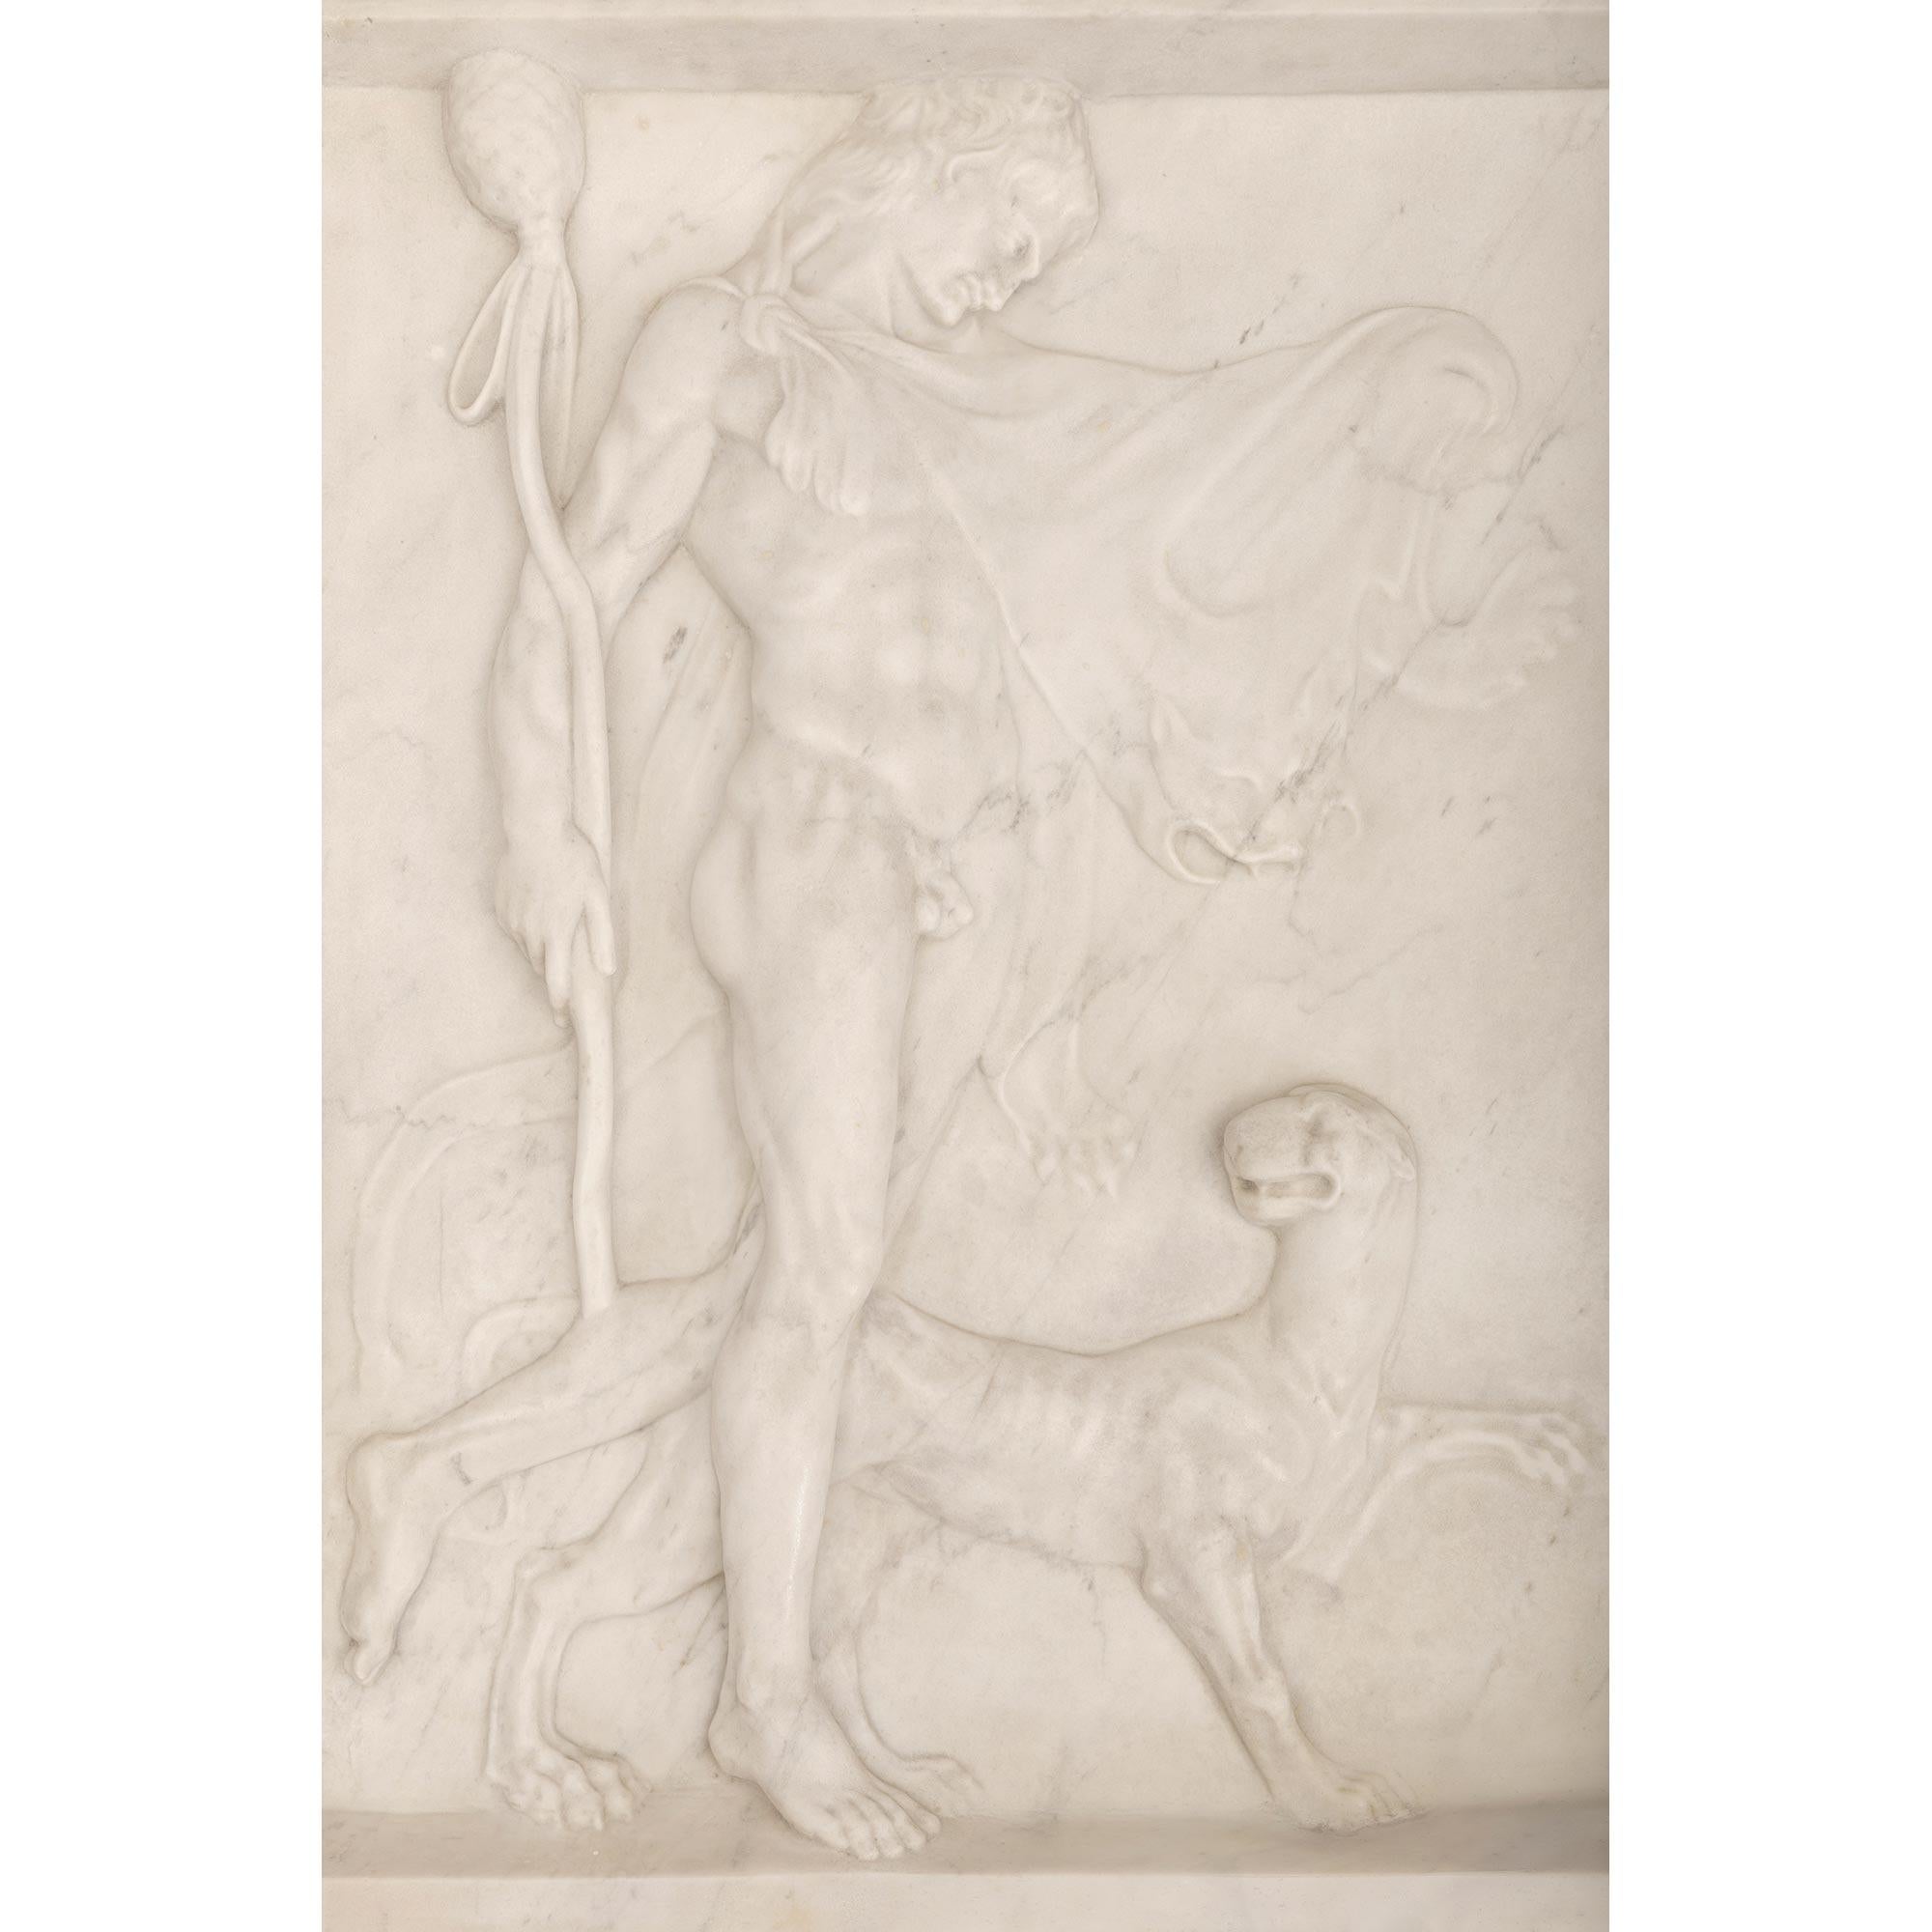 A stunning and most impressive Italian 19th century neo-classical st. White Carrara marble wall decor relief plaque. The rectangular plaque displays an elegant raised lip at the top and bottom framing the beautiful intricately detailed scene at the